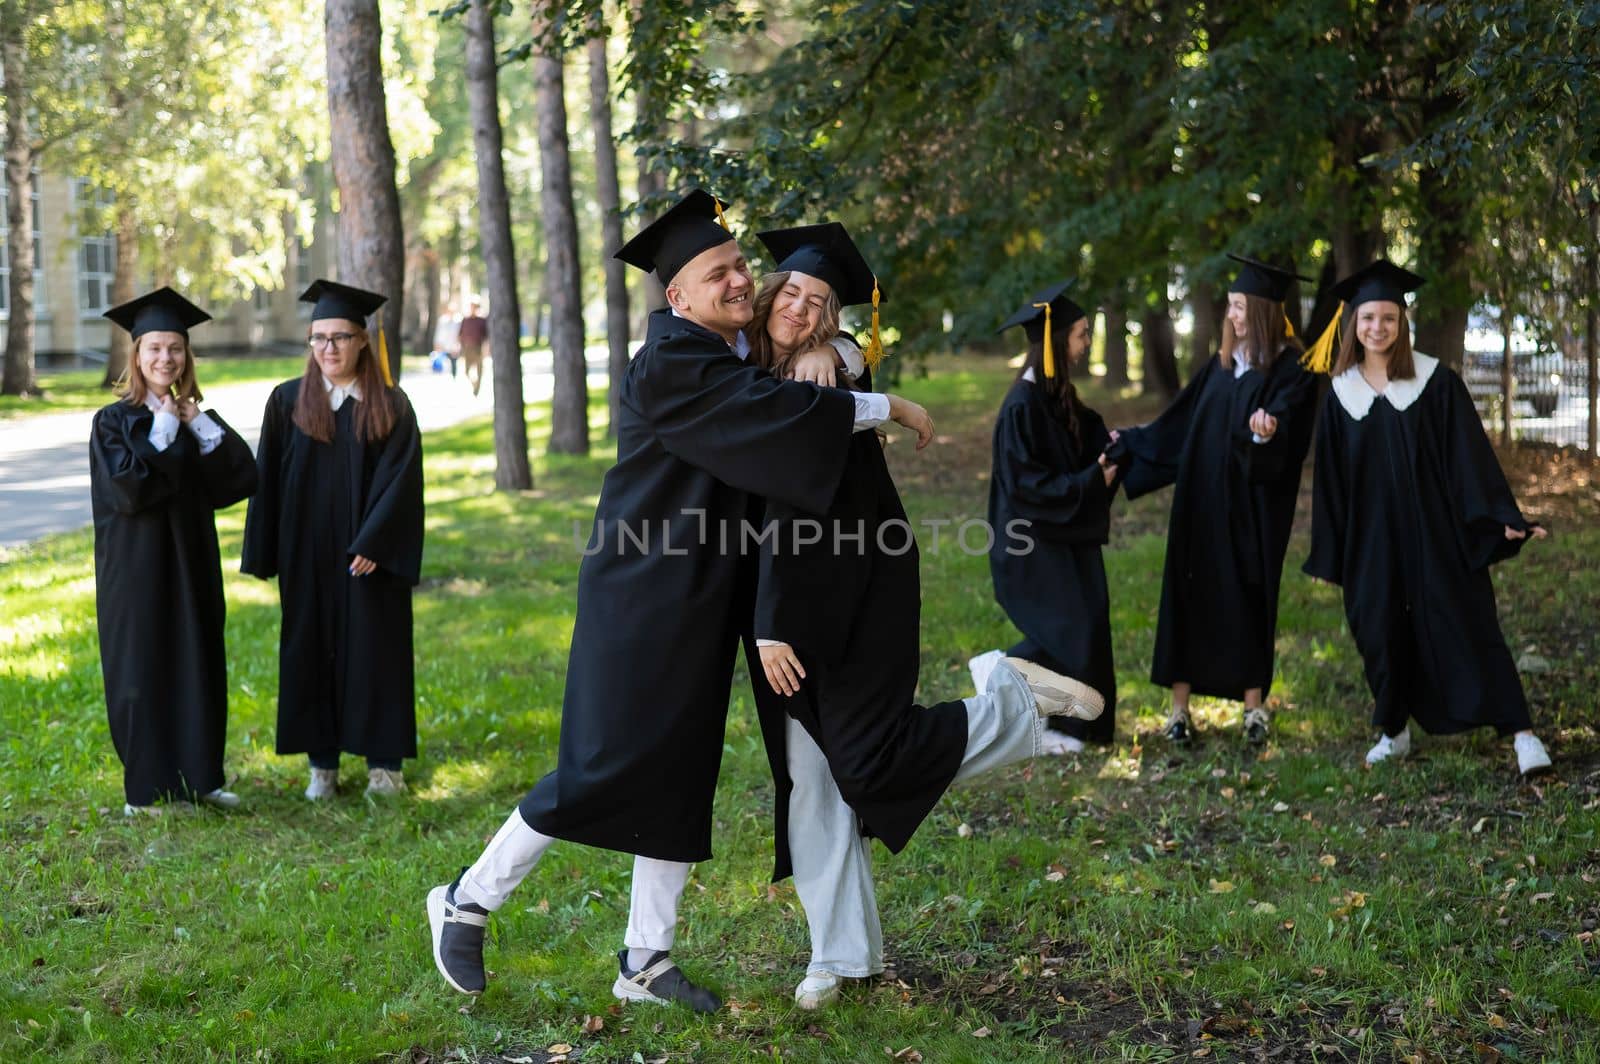 A group of graduates in robes congratulate each other on their graduation outdoors. by mrwed54